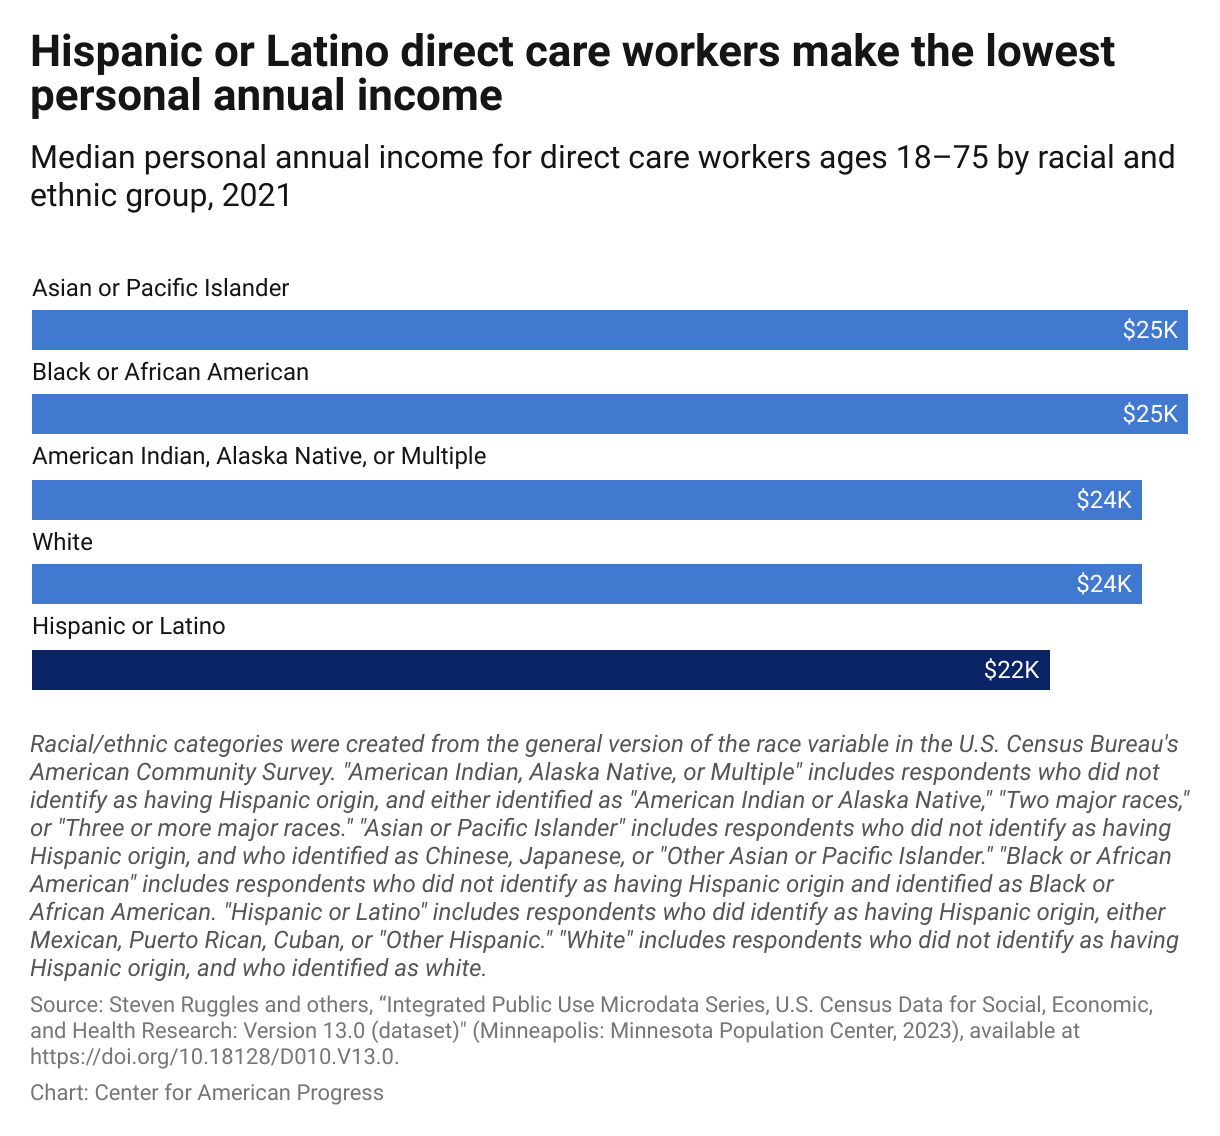 Bar chart showing that Hispanic or Latino direct care workers make the lowest average personal annual income of racial or ethnic groups at $22,000. 